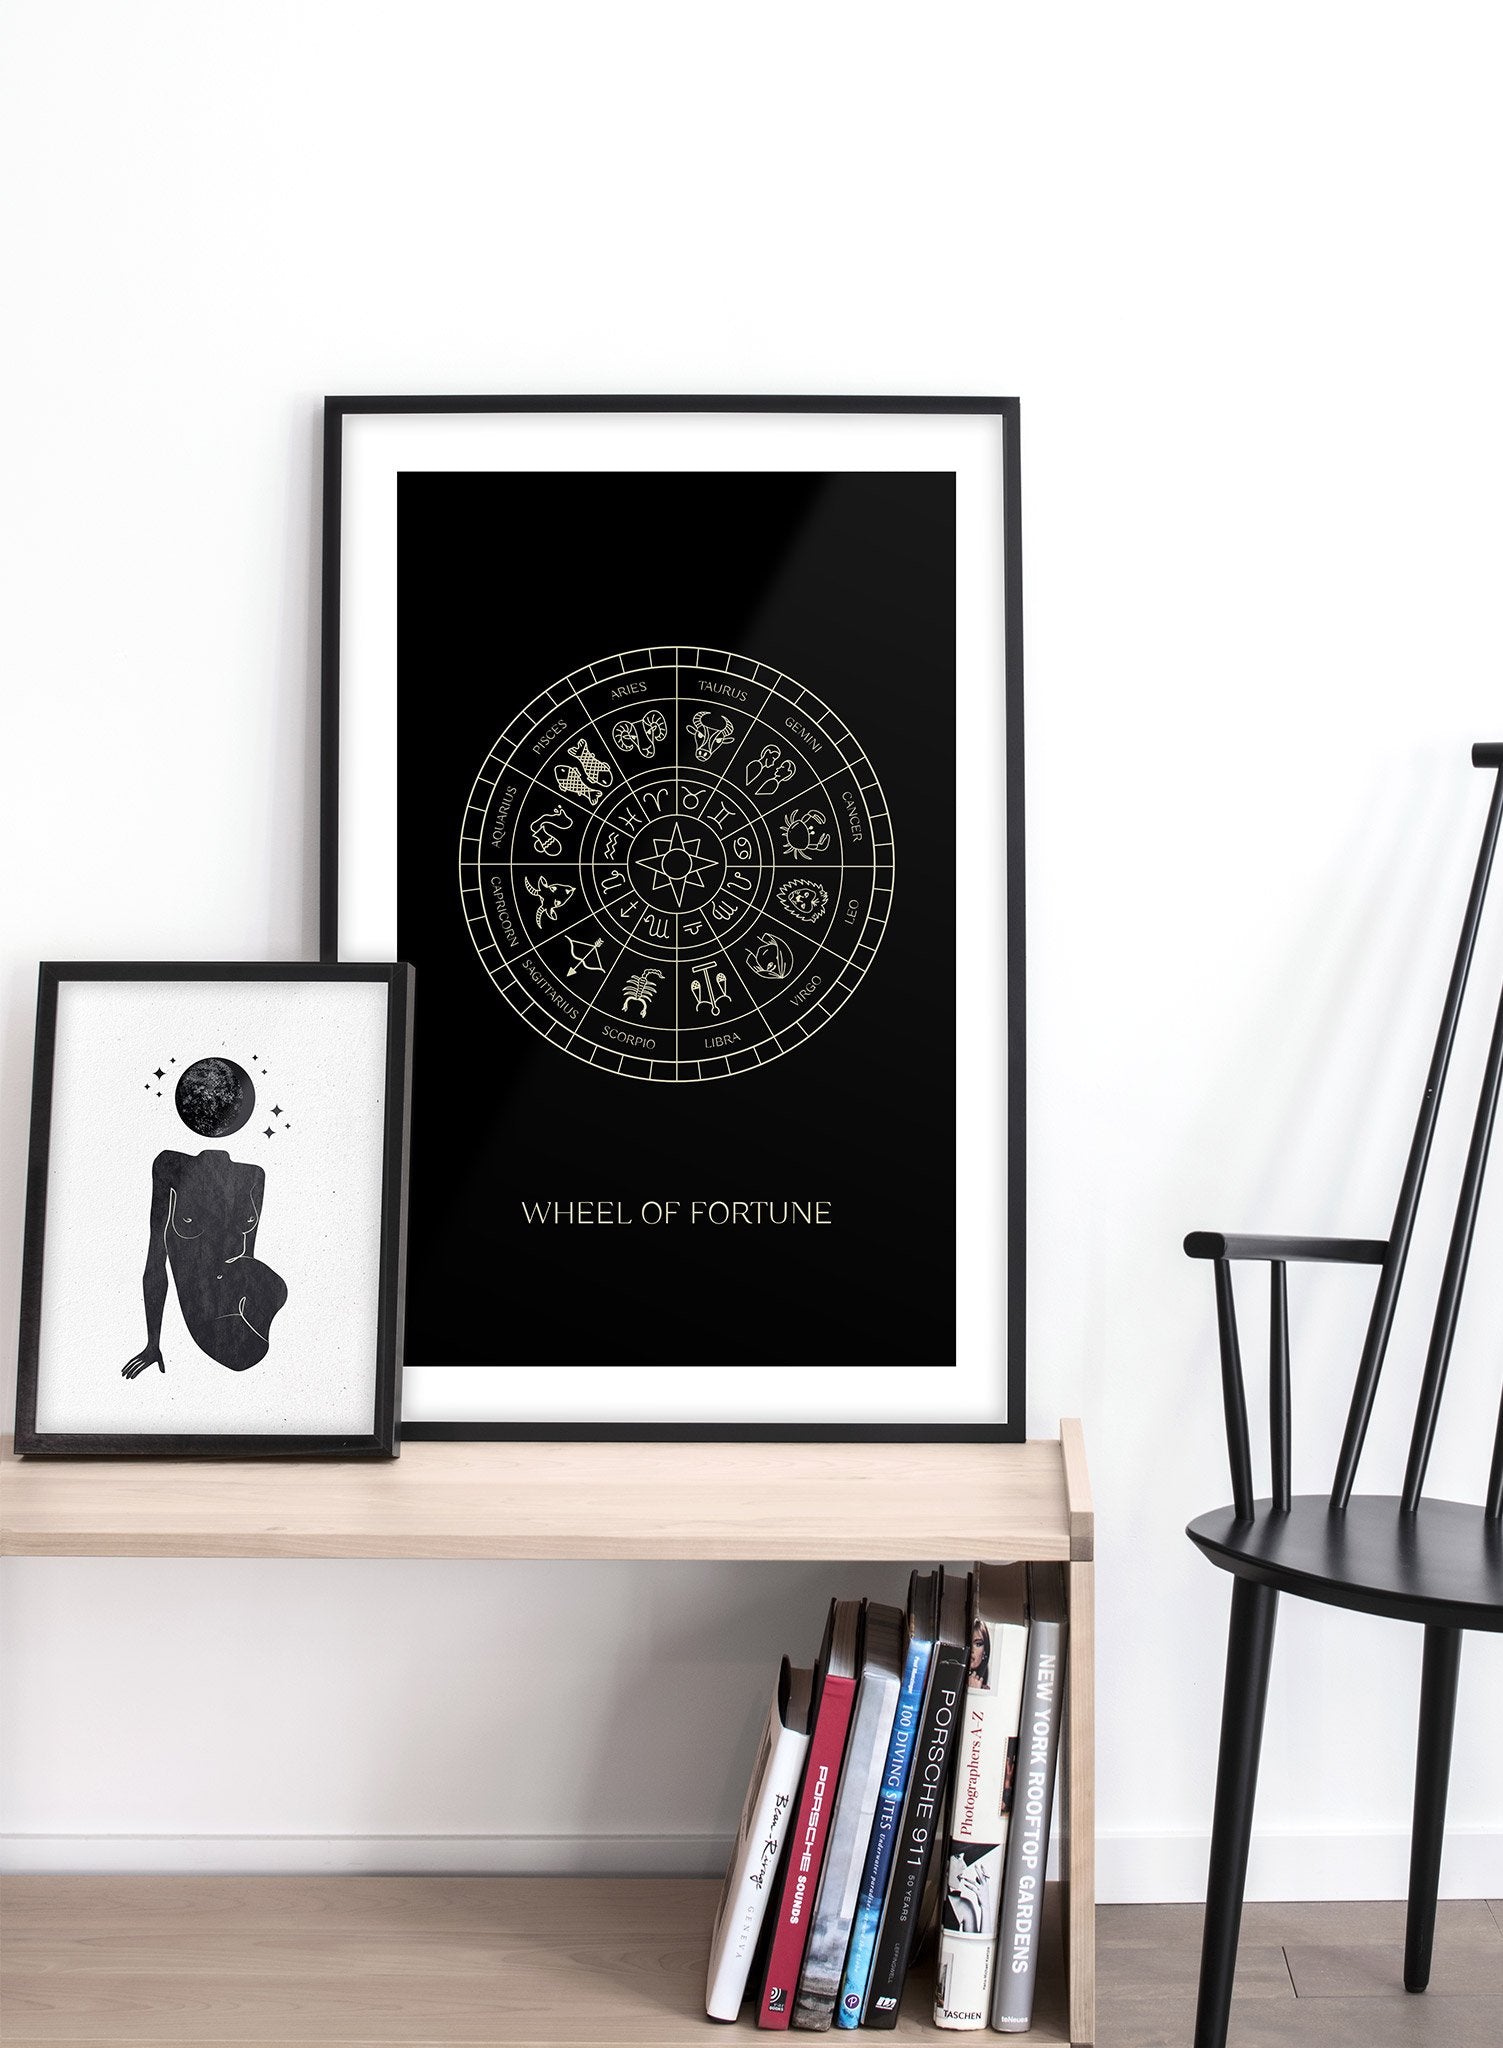 Celestial illustration poster by Opposite Wall with Wheel of Fortune Tarot card - Lifestyle Duo - Living Room